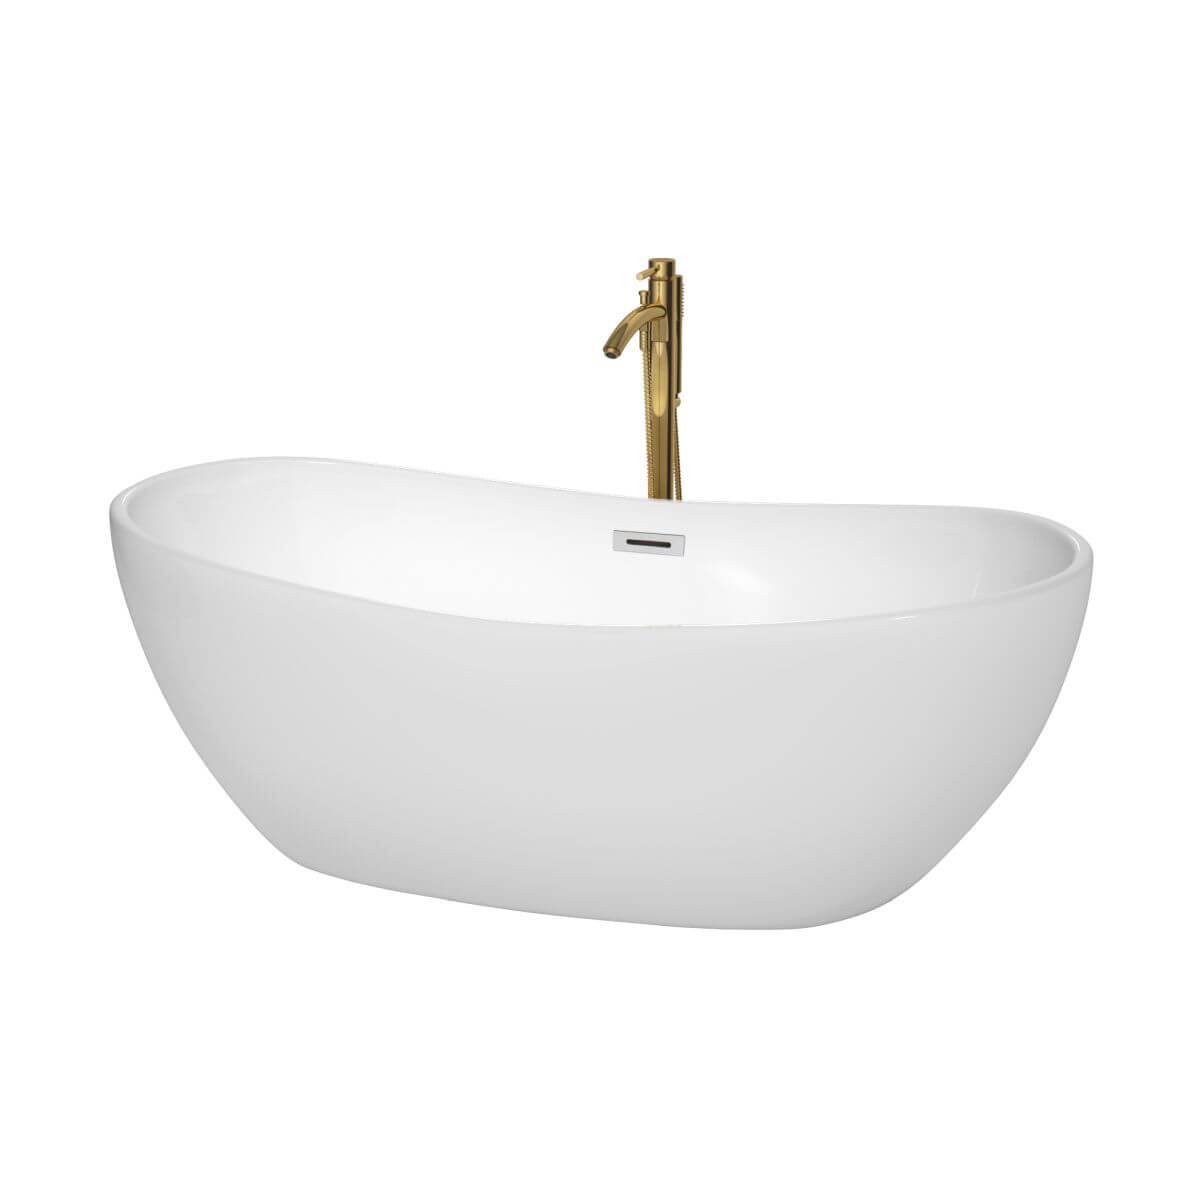 Wyndham Collection Rebecca 65 inch Freestanding Bathtub in White with Polished Chrome Trim and Floor Mounted Faucet in Brushed Gold - WCOBT101465PCATPGD